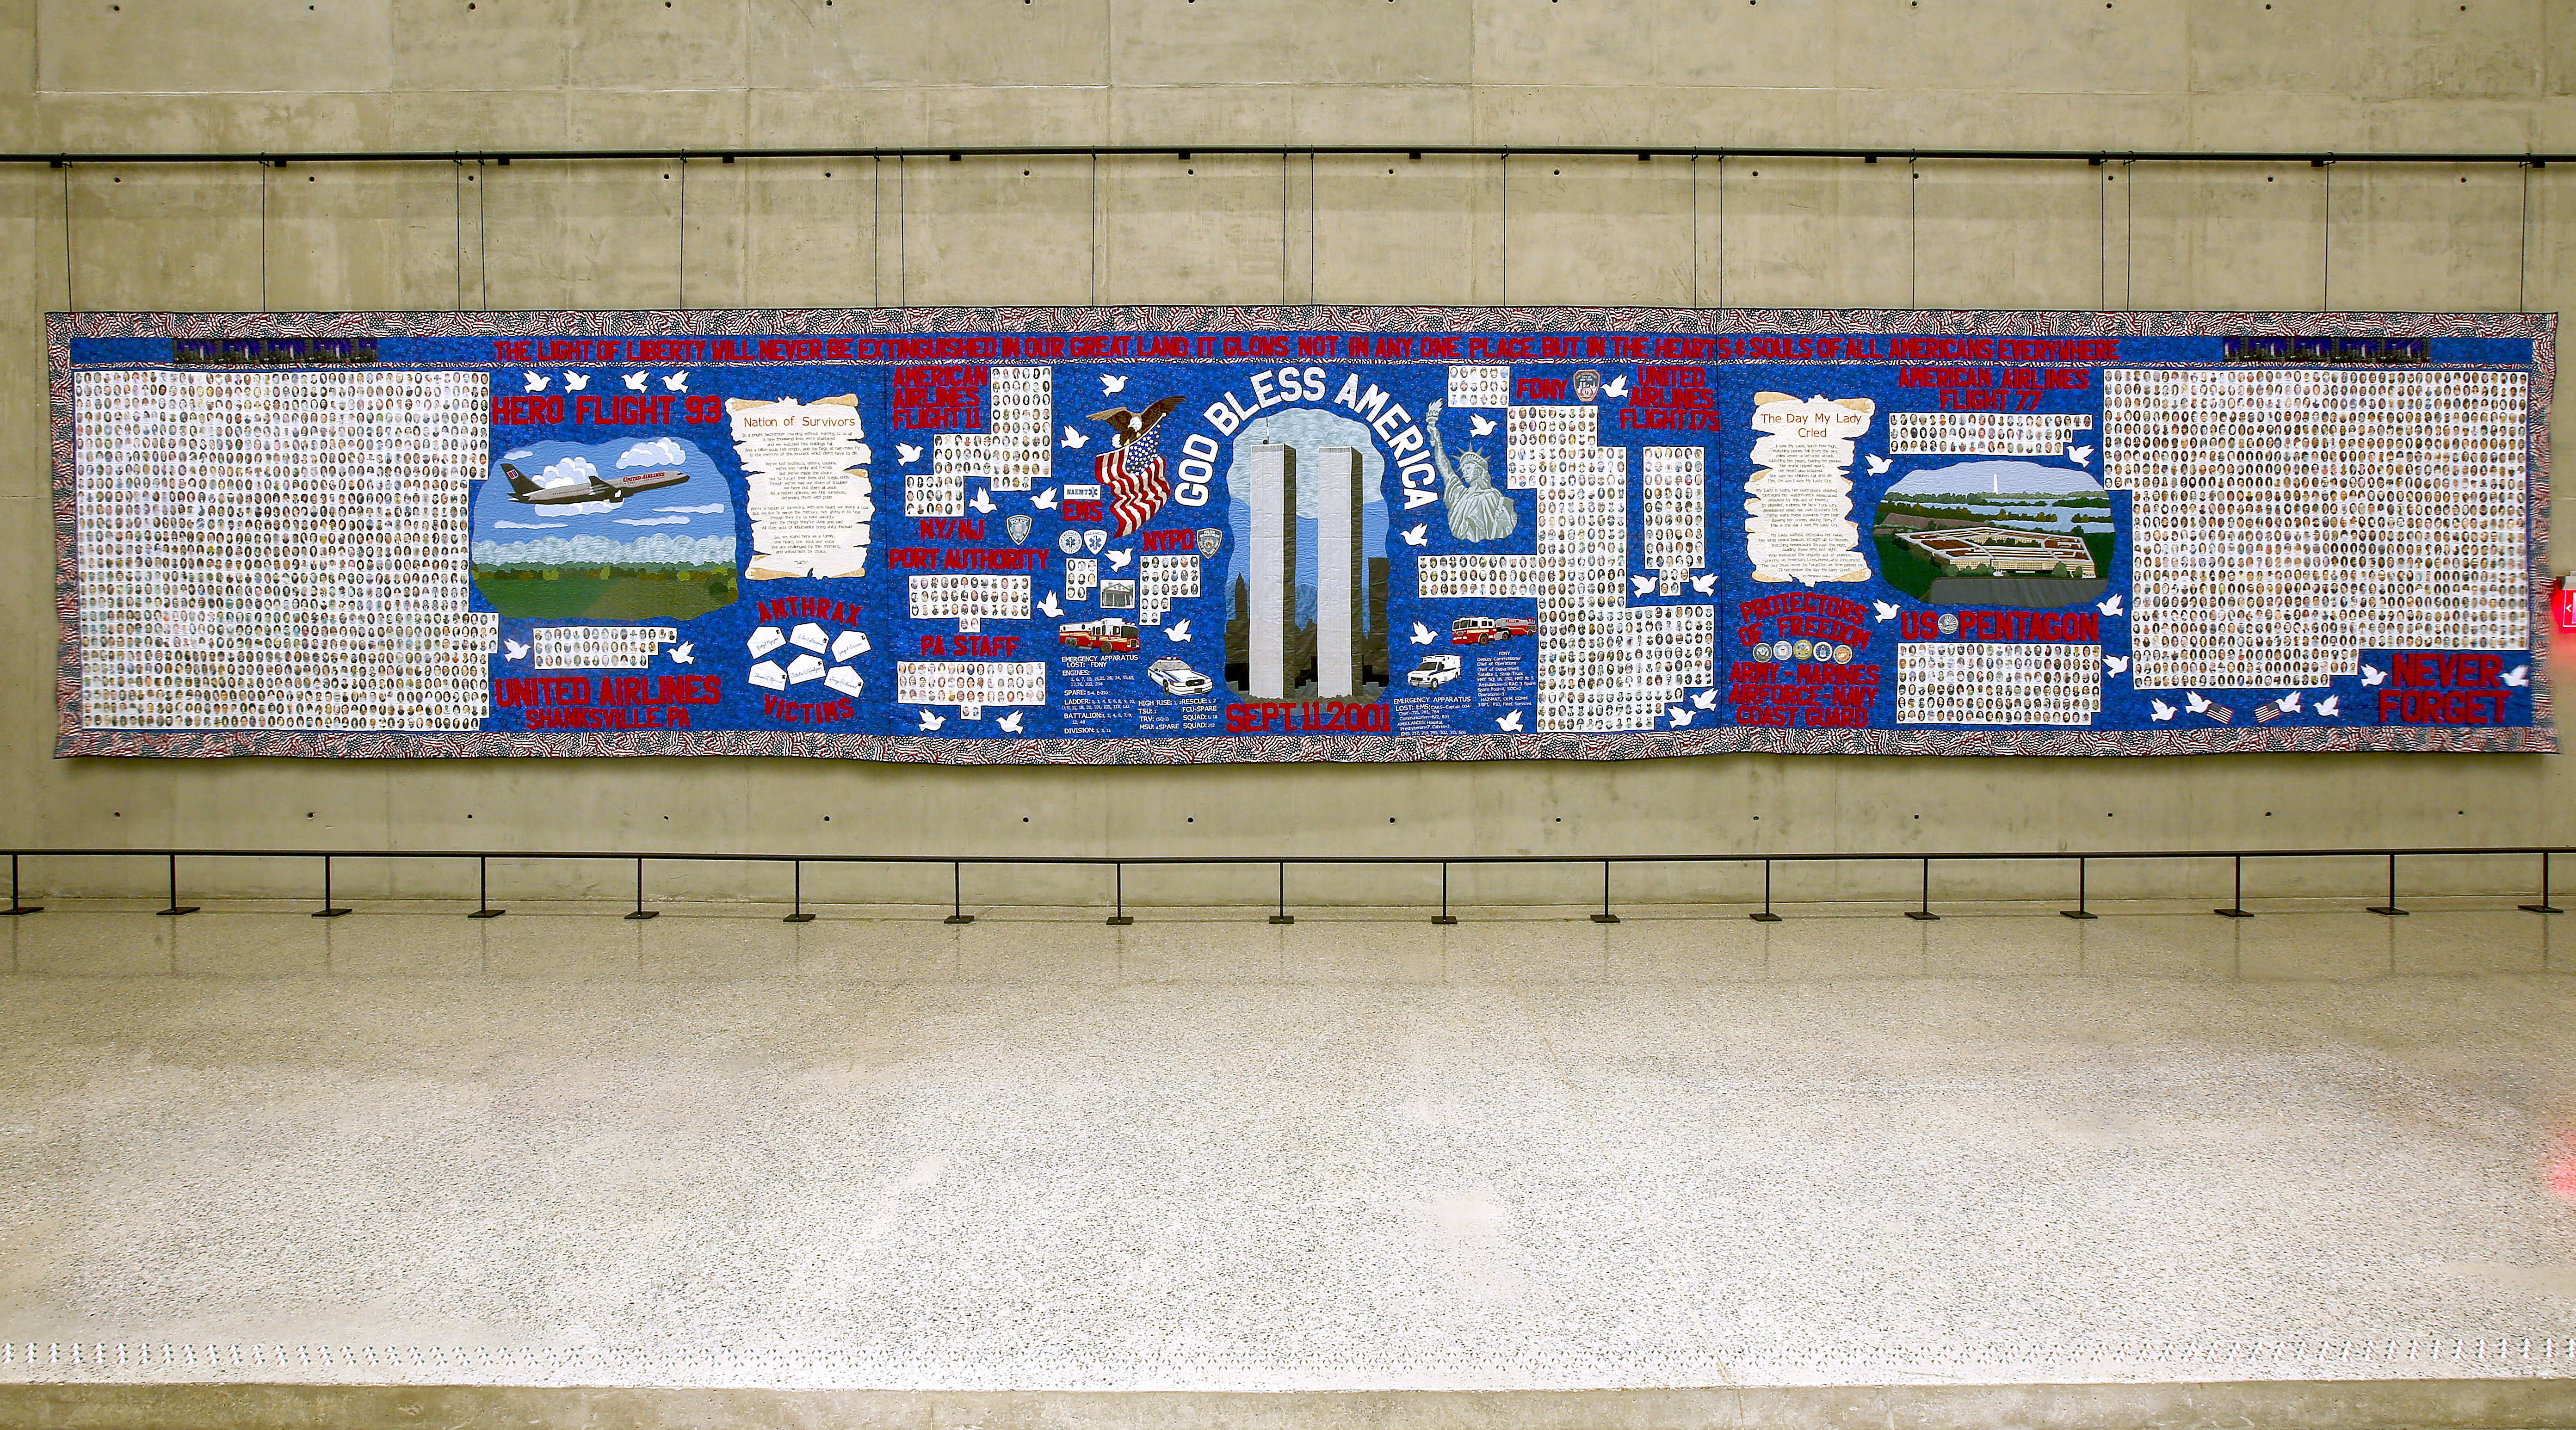 A 60-foot-wide quilt titled America’s 9/11 Victims Quilty is displayed at the Museum. The quilt features a latticework of pictures and names honoring the victims of the attacks. The center of the quilt includes a depiction of the Twin Towers with the words “God Bless America.”